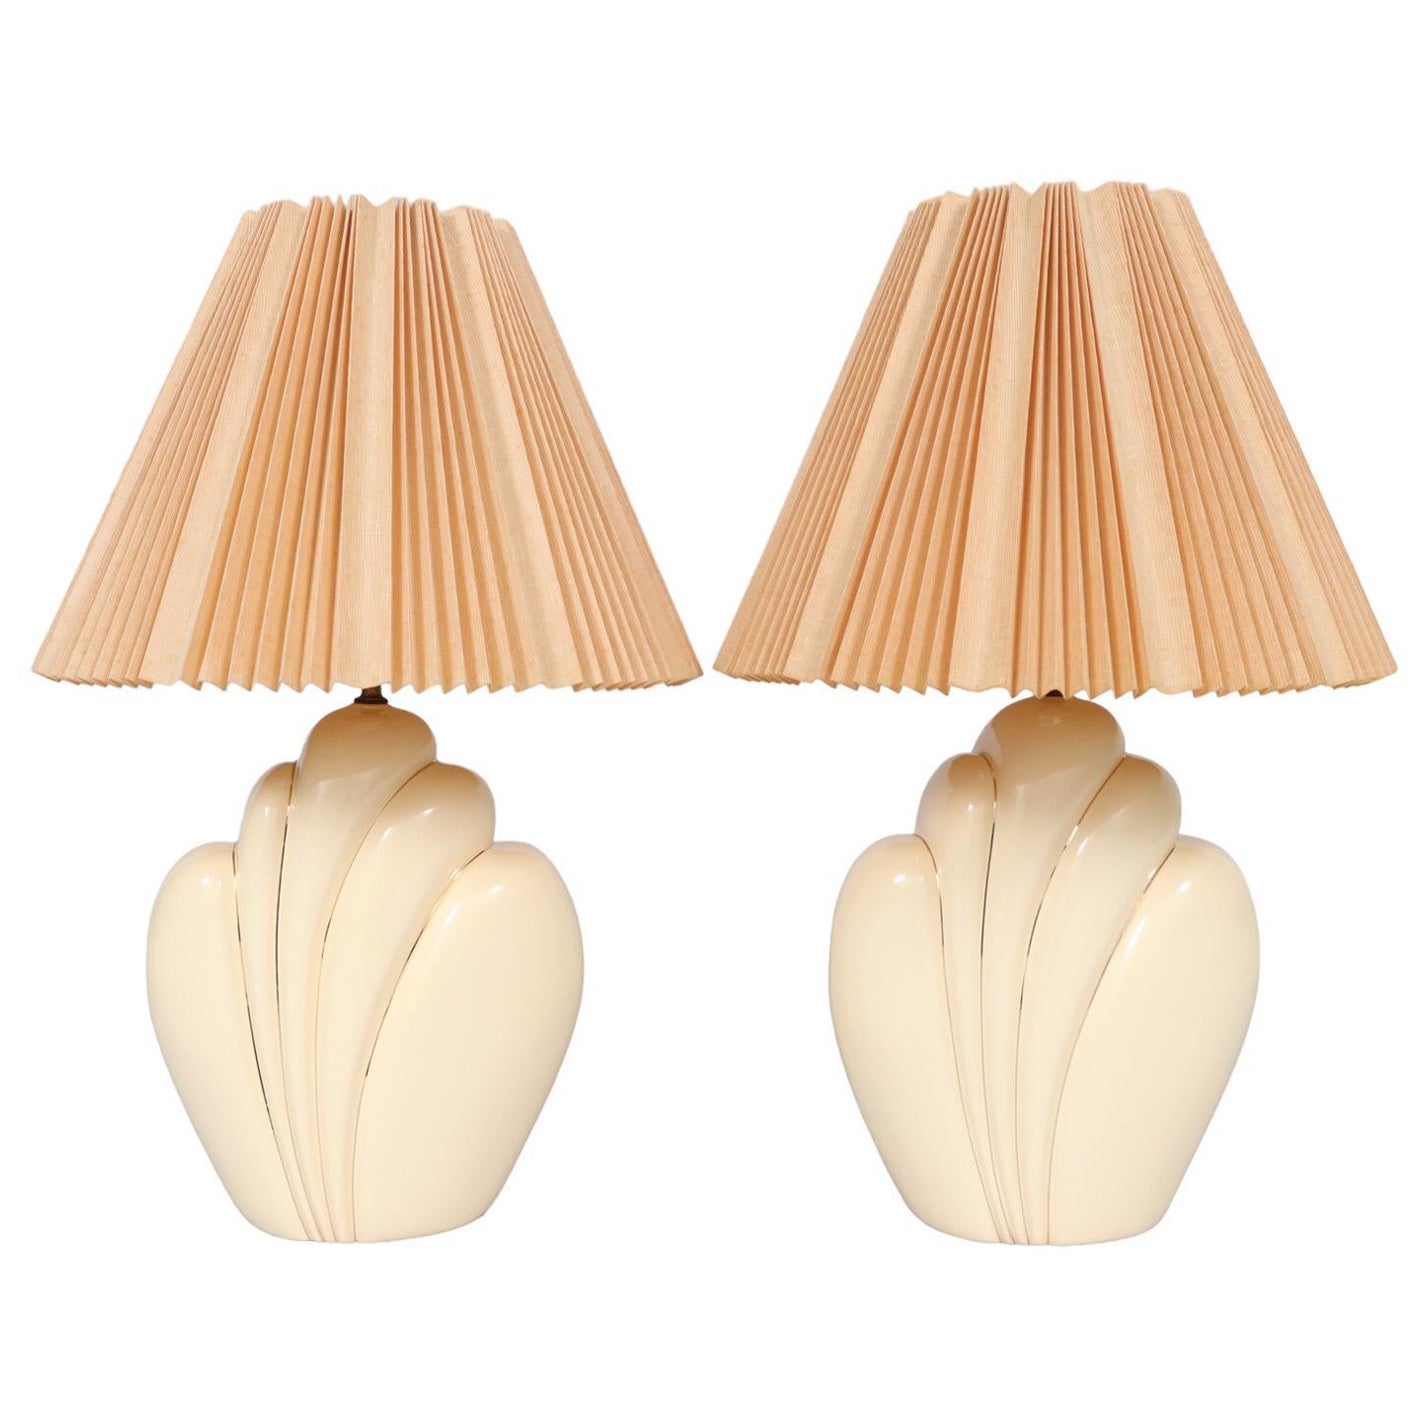 Sculptural Ceramic Table Lamps, a Pair For Sale